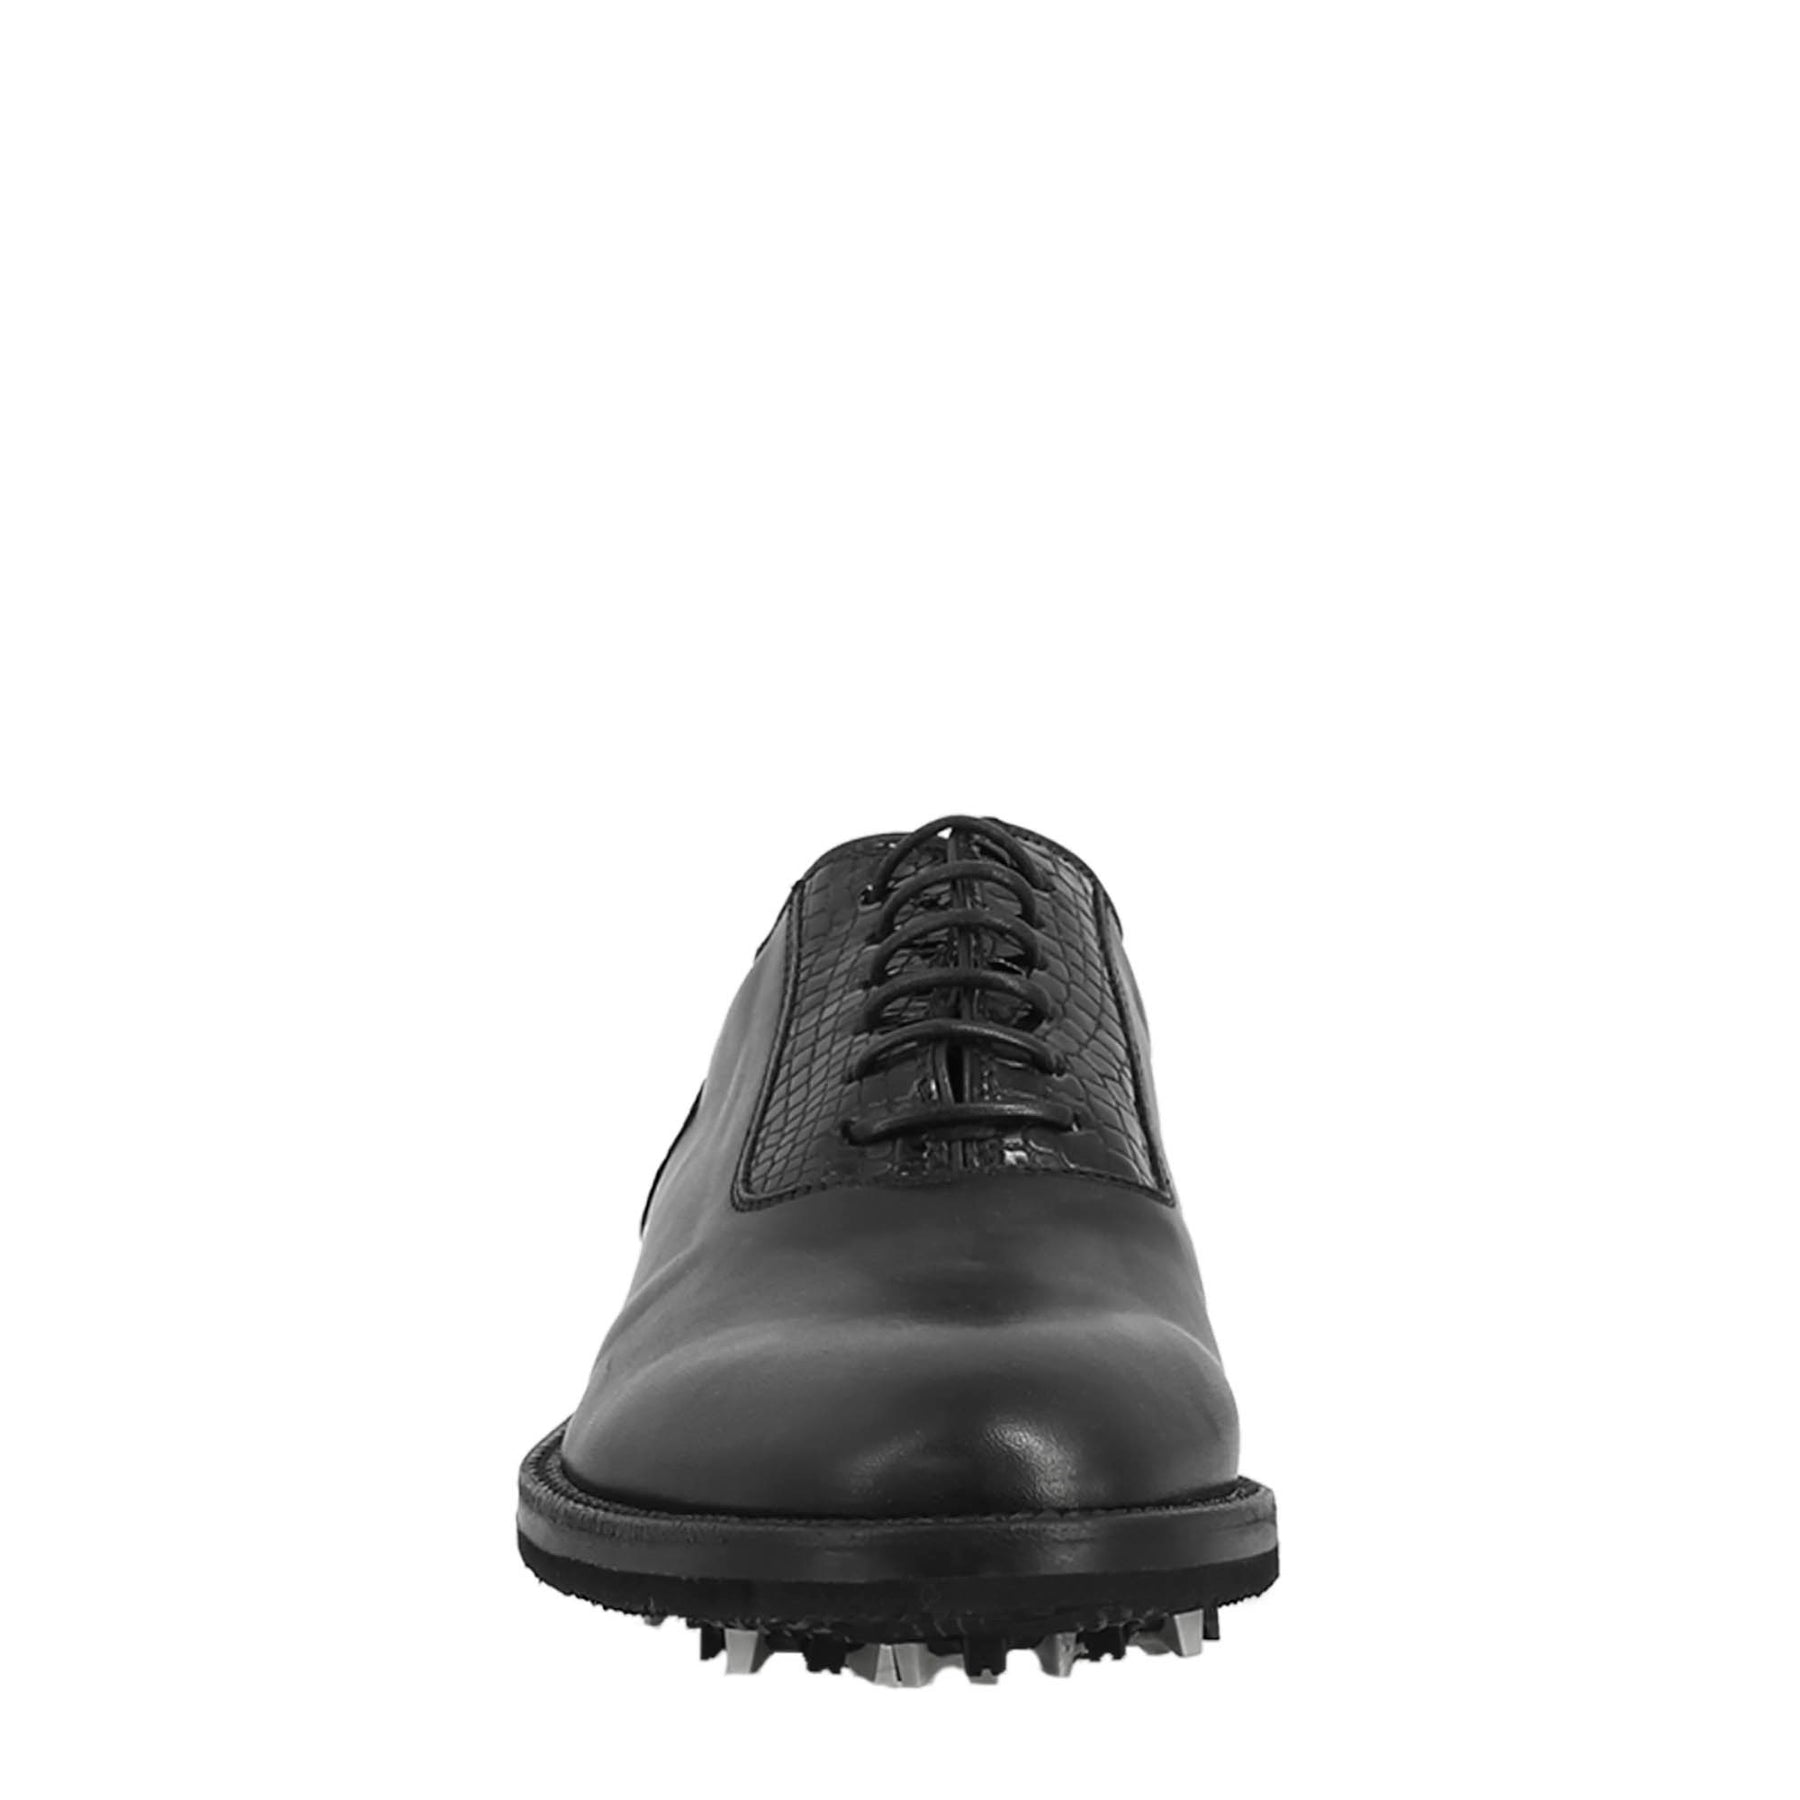 Women's golf shoes black leather handcrafted brogue details